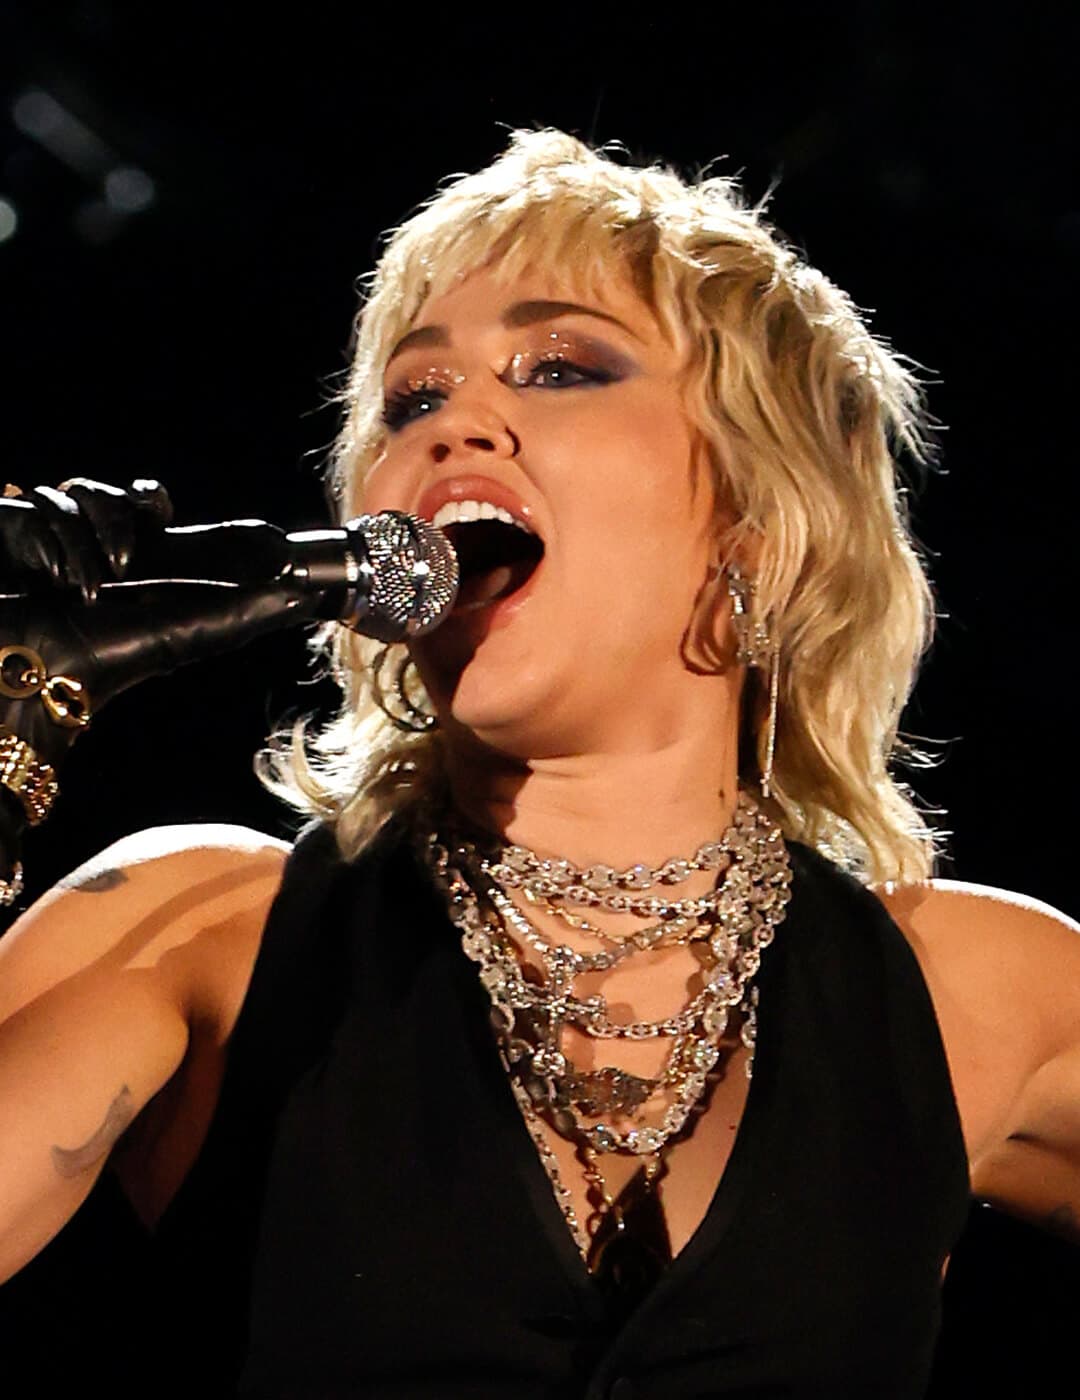 Miley Cyrus in a black outfit and short, wavy hairstyle singing her heart out